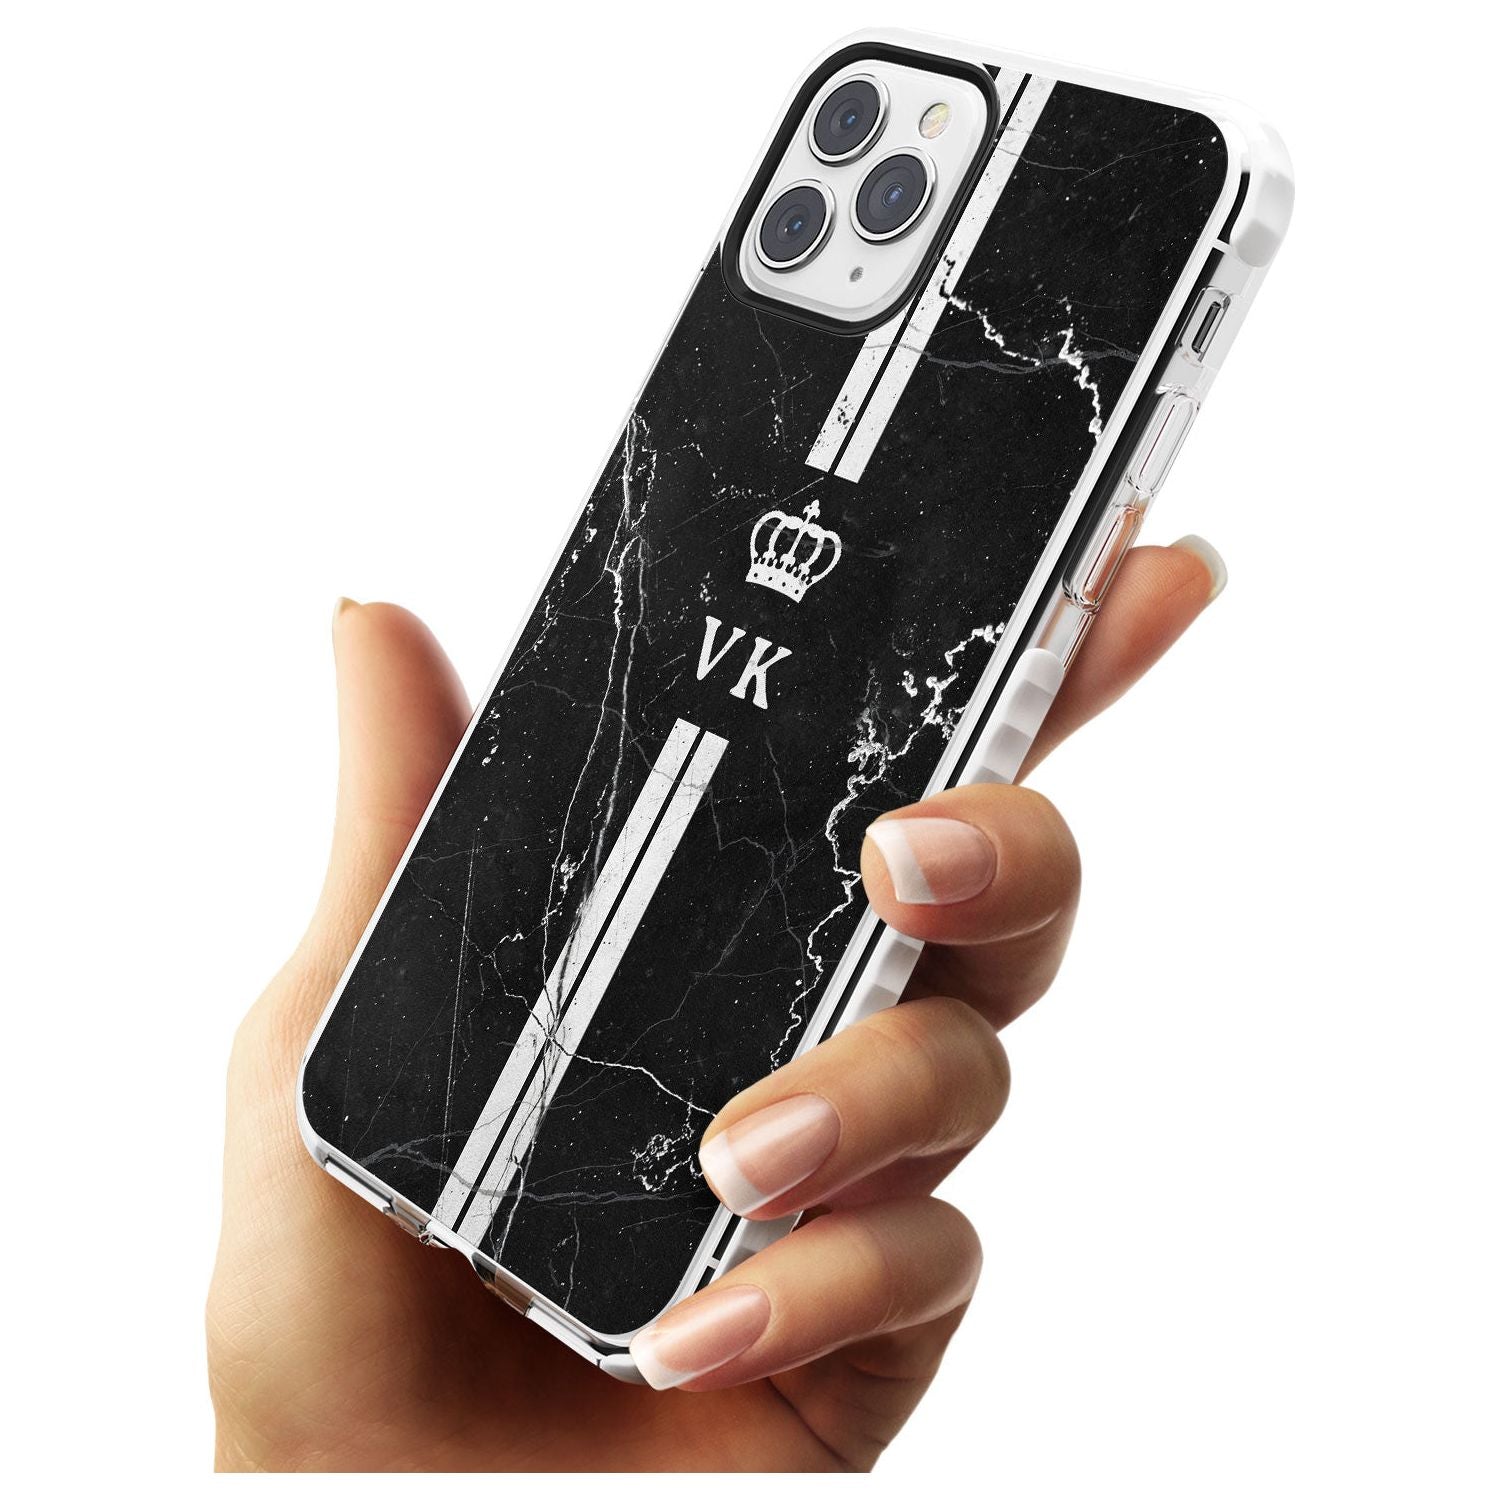 Stripes + Initials with Crown on Black Marble Impact Phone Case for iPhone 11 Pro Max